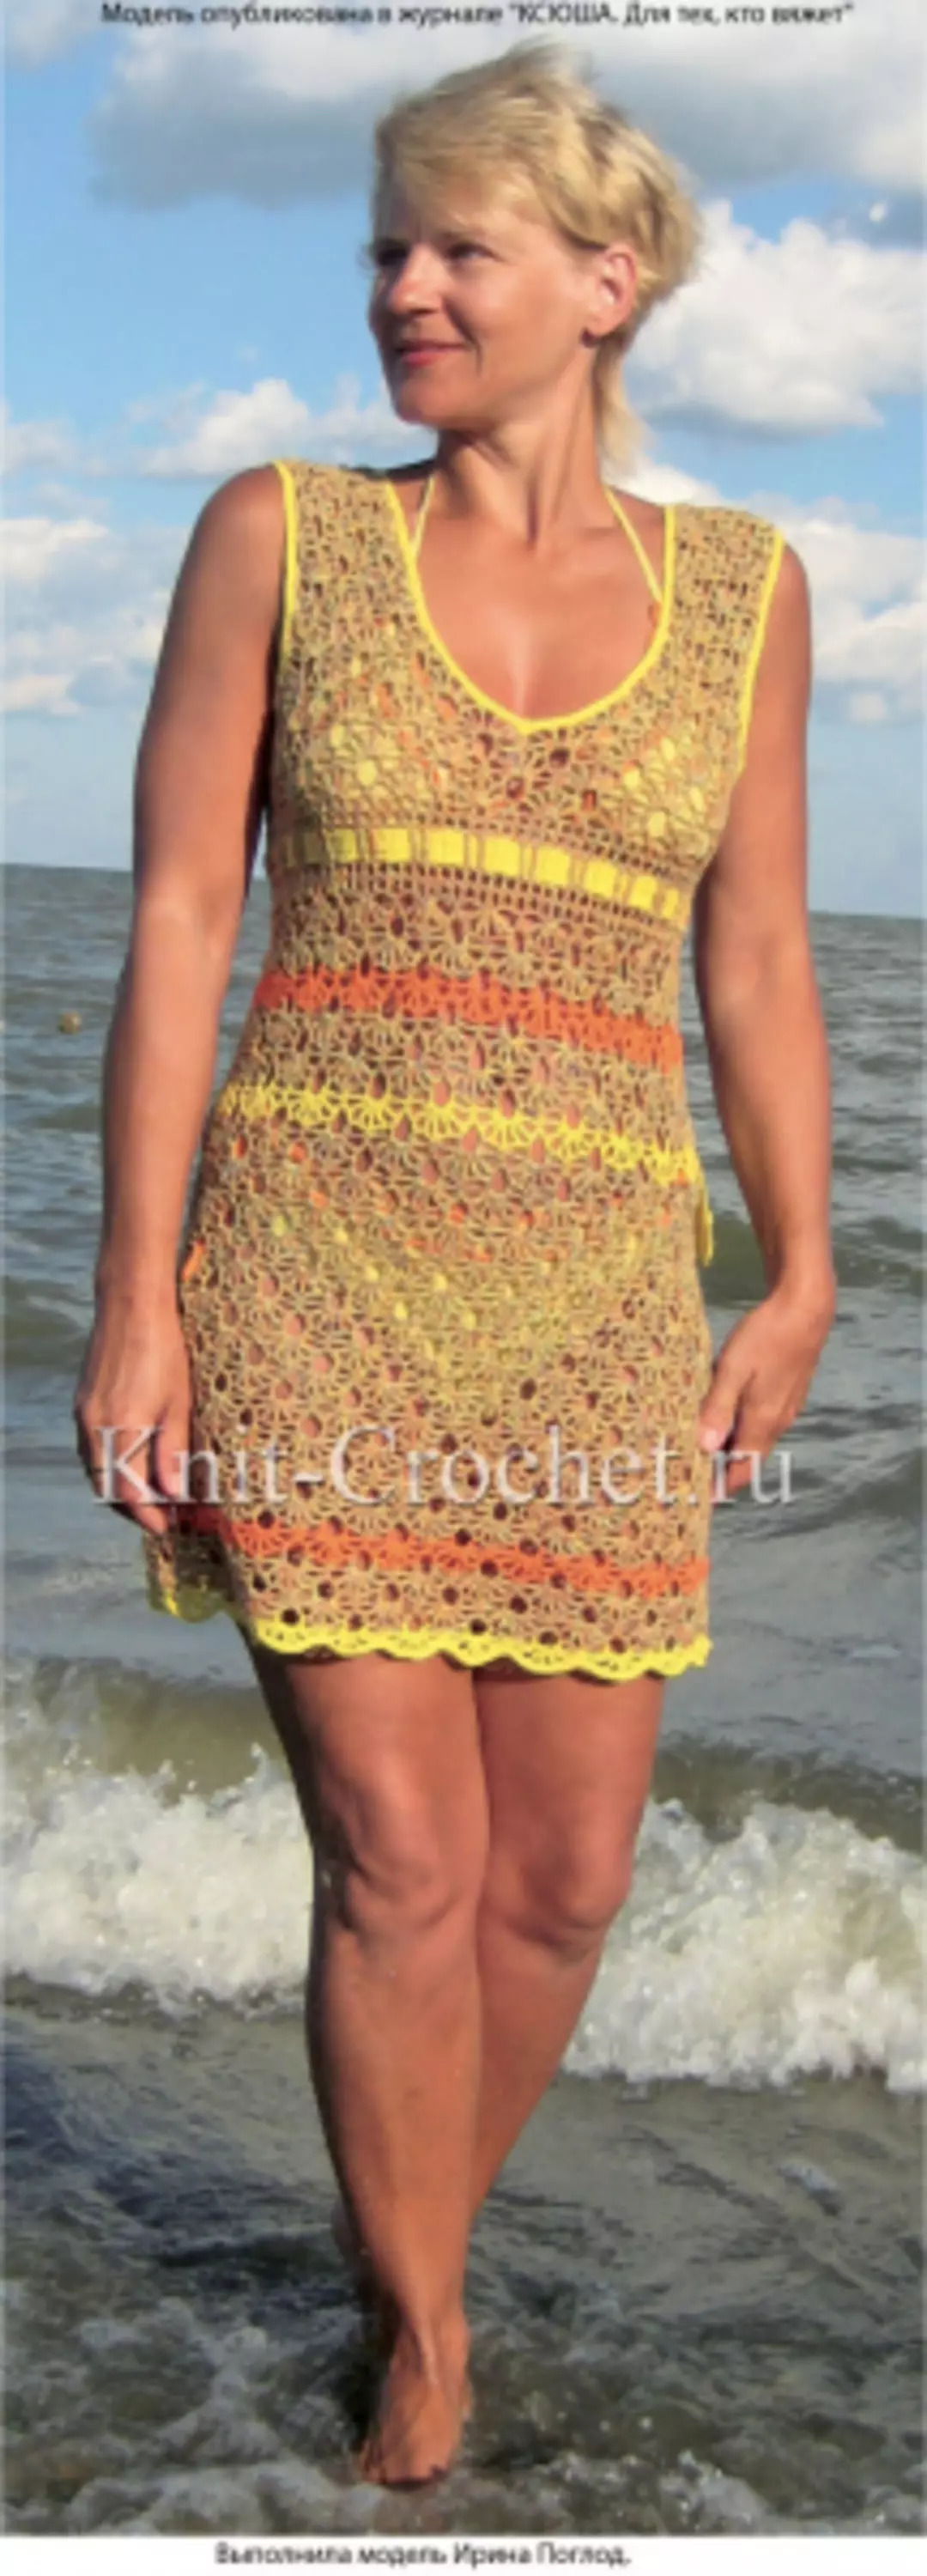 Cook Beach Tunic: Master Class with Schemes and Description